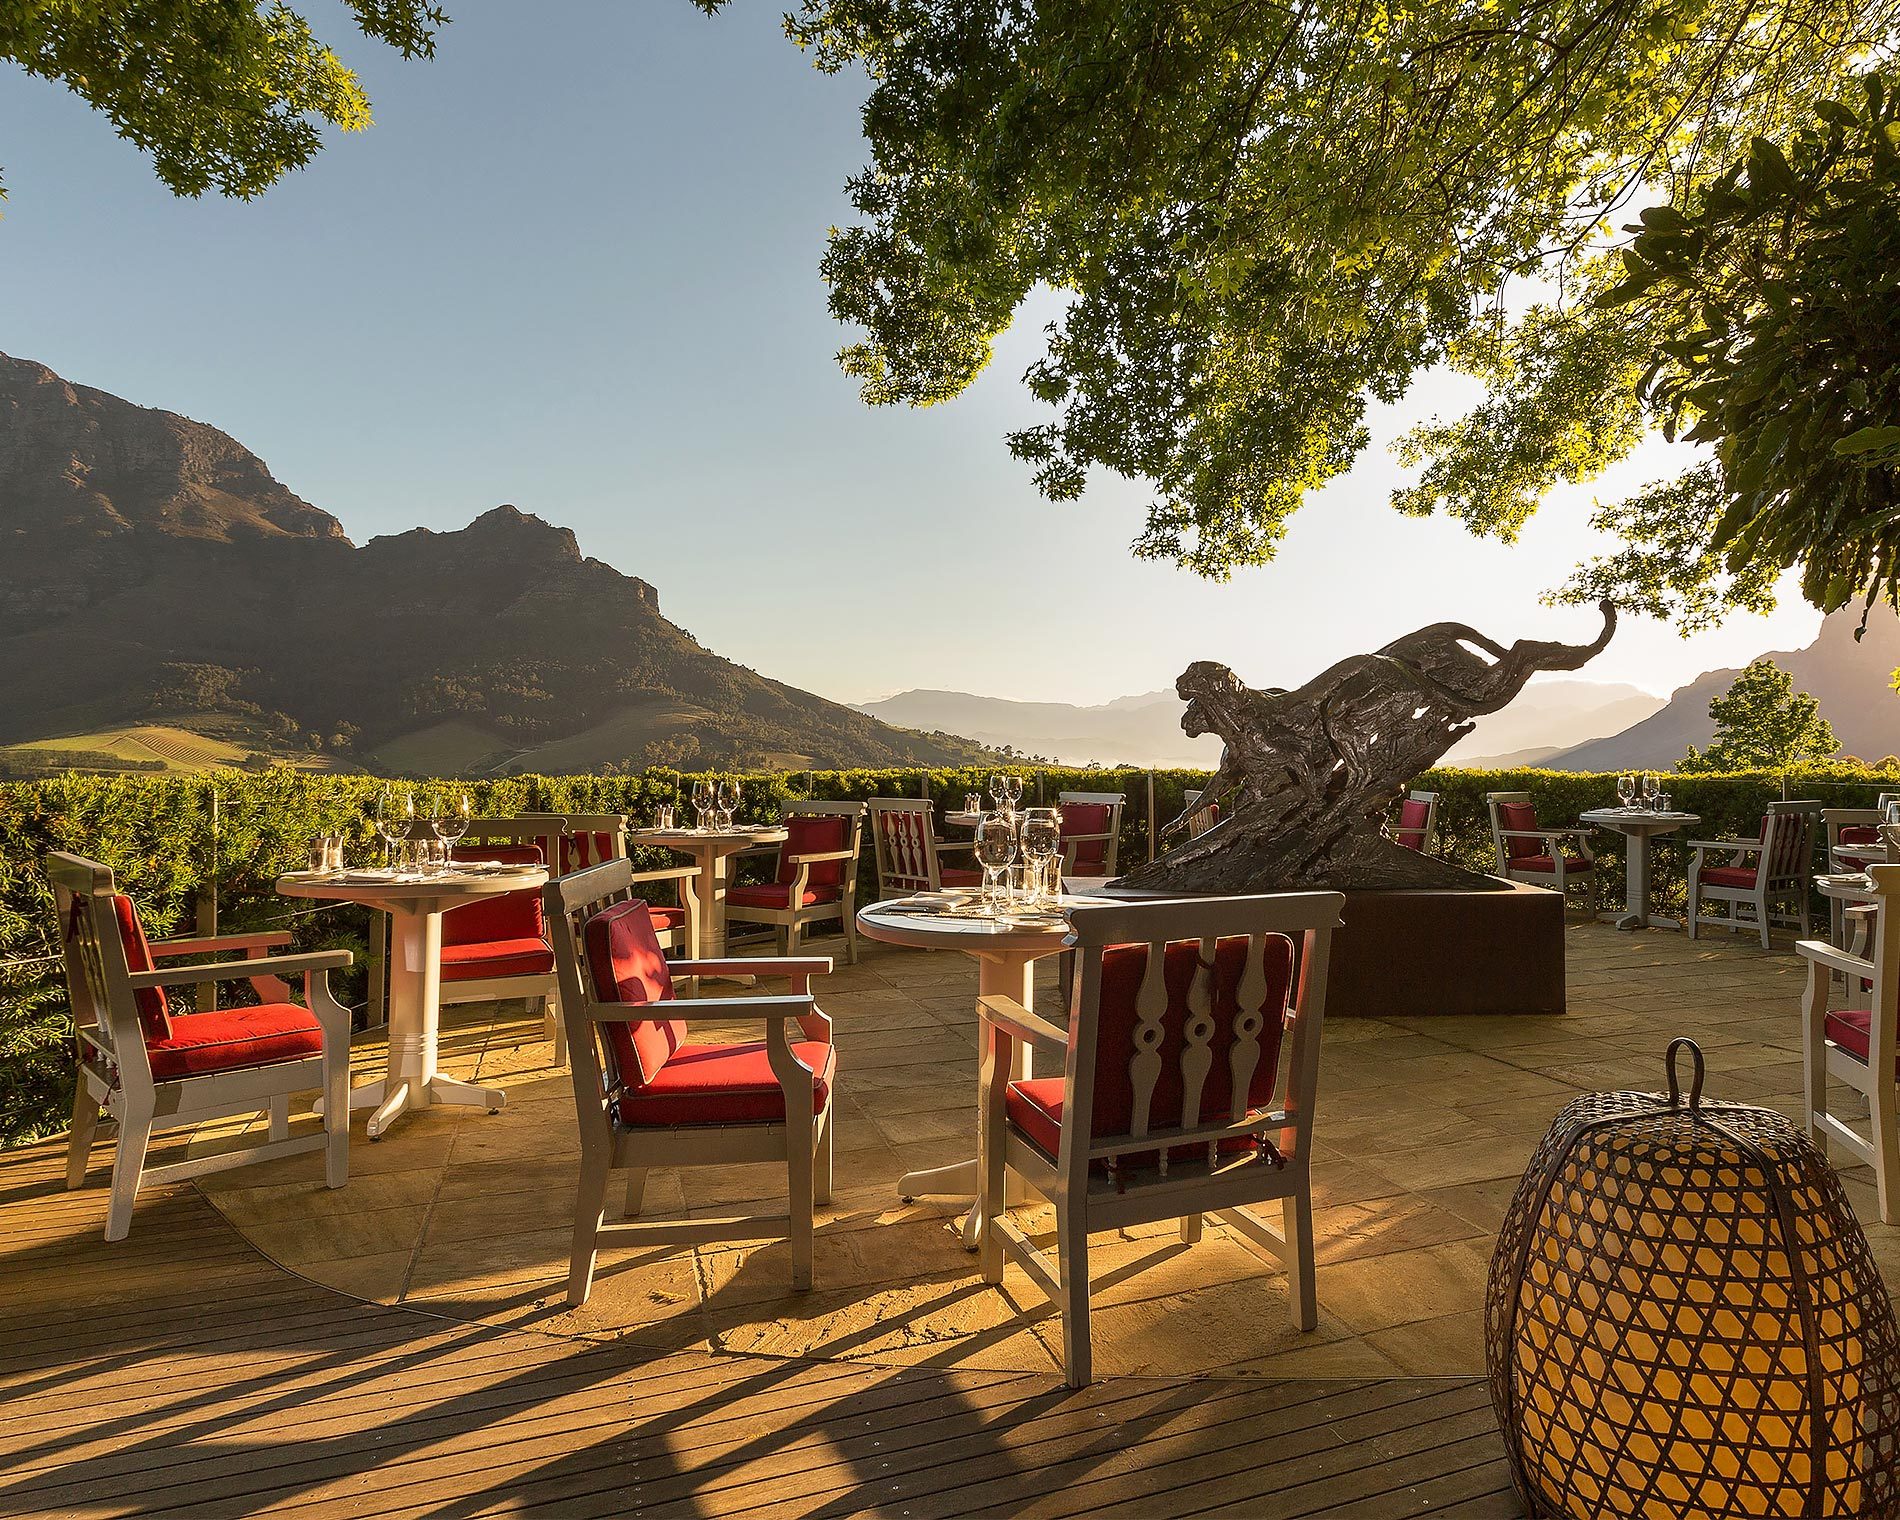 The Delaire Graff Restaurant terrace with dining tables and a Cheetah sculpture by Dylan Lewis